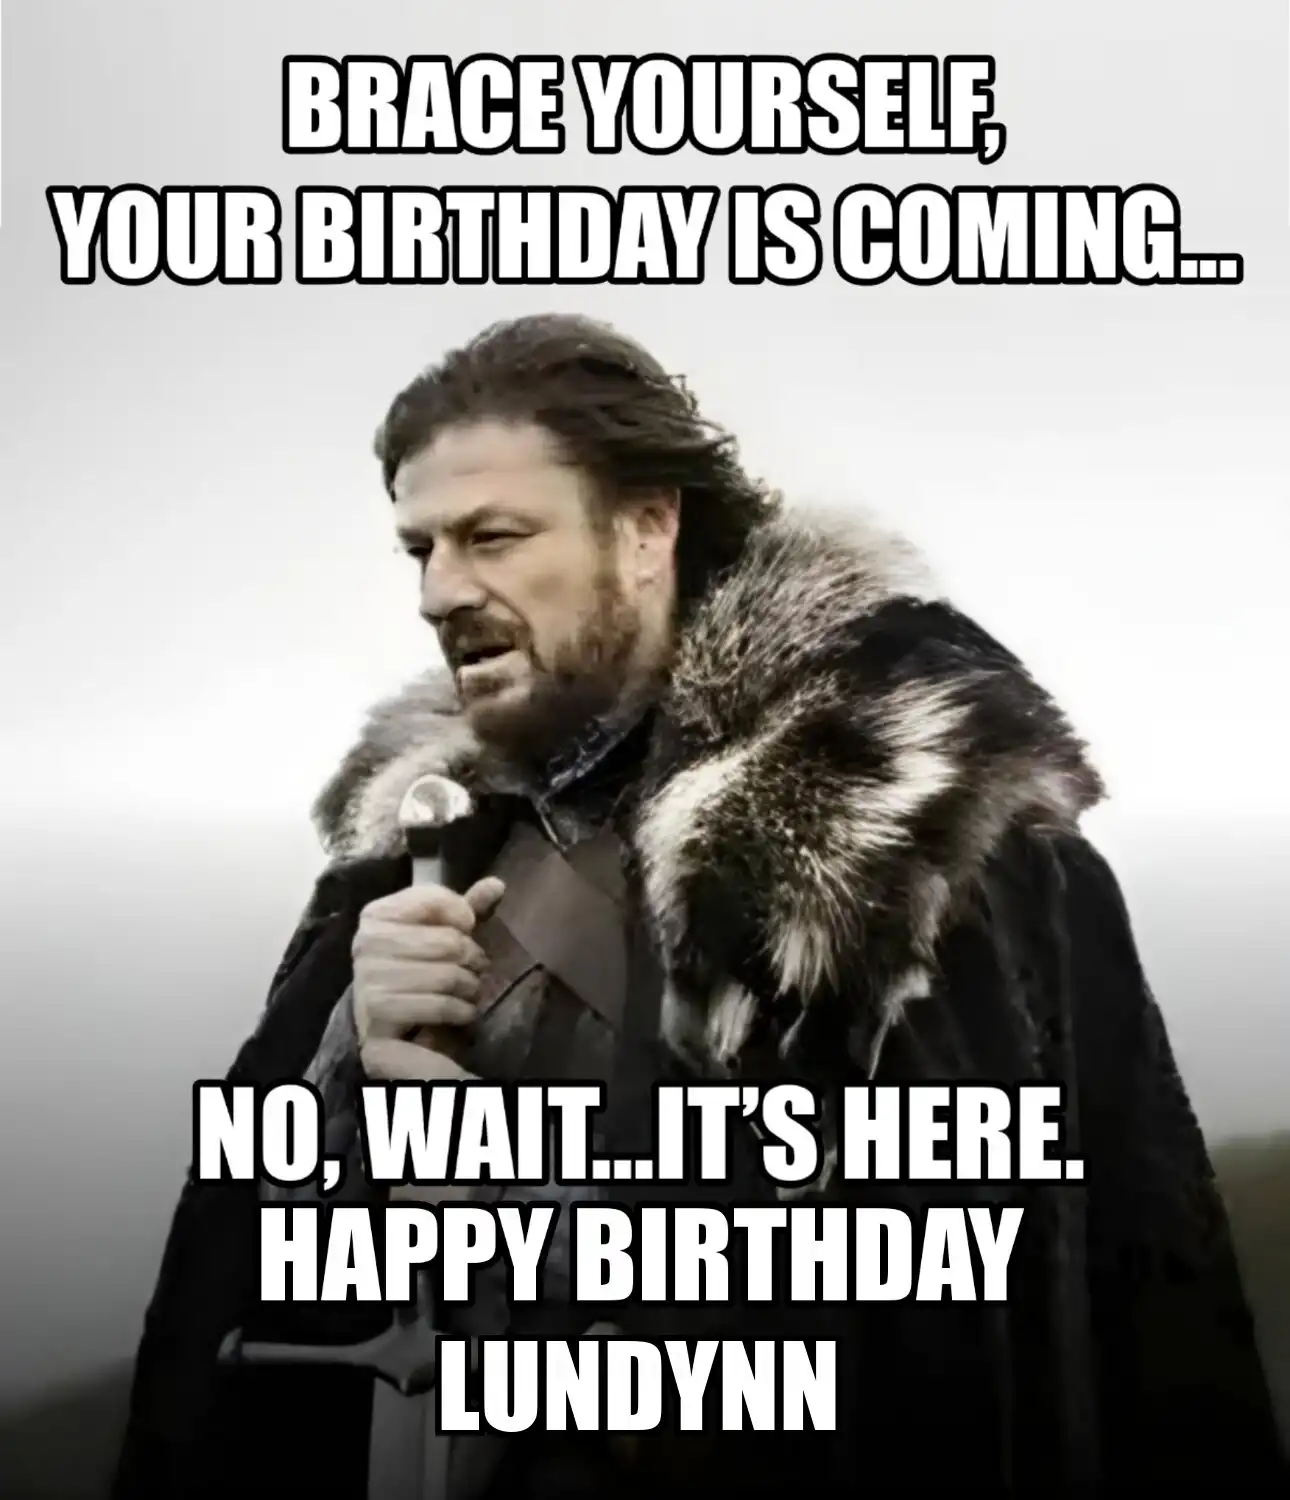 Happy Birthday Lundynn Brace Yourself Your Birthday Is Coming Meme